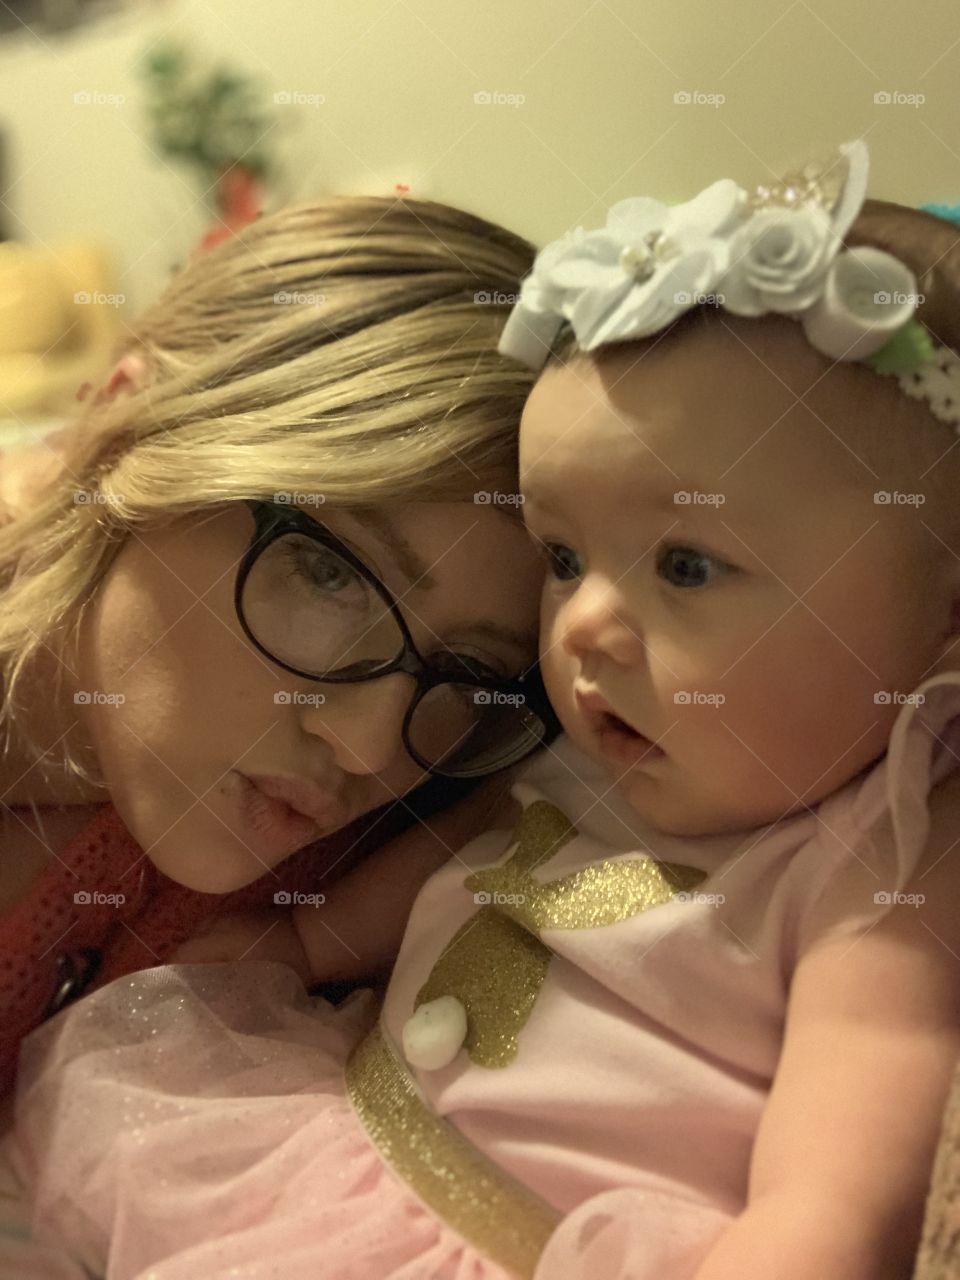 Mommy and Freya. My little 7 month old beauty she has an amazing personality and is Always smiling no matter what. She is such an amazing baby!